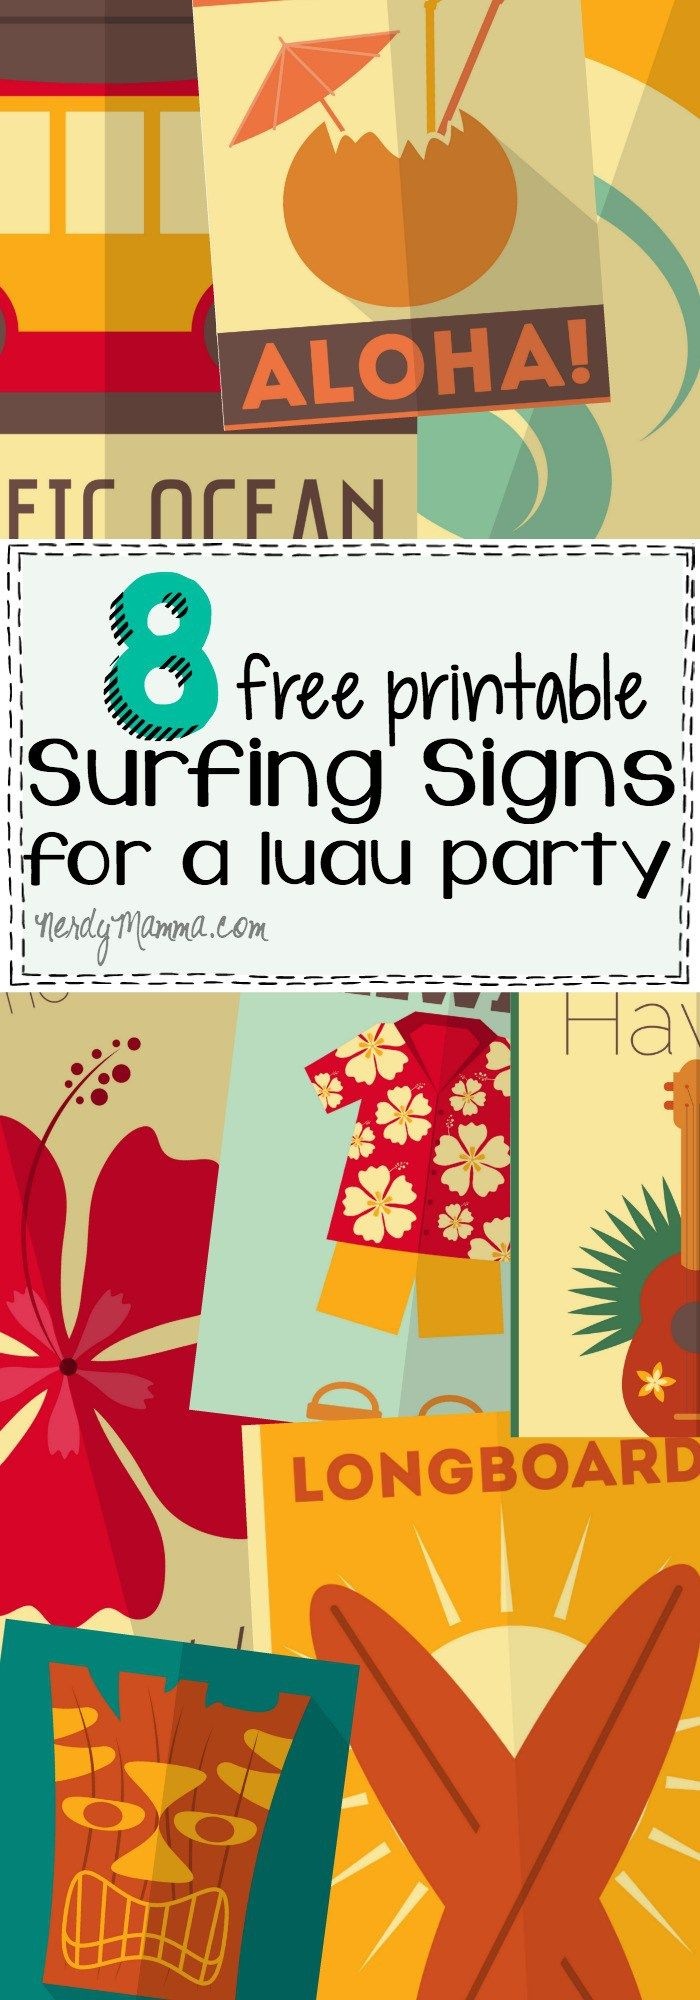 These Free Printable Surfing Signs Would Make Awesome Decorations - Free Luau Printables